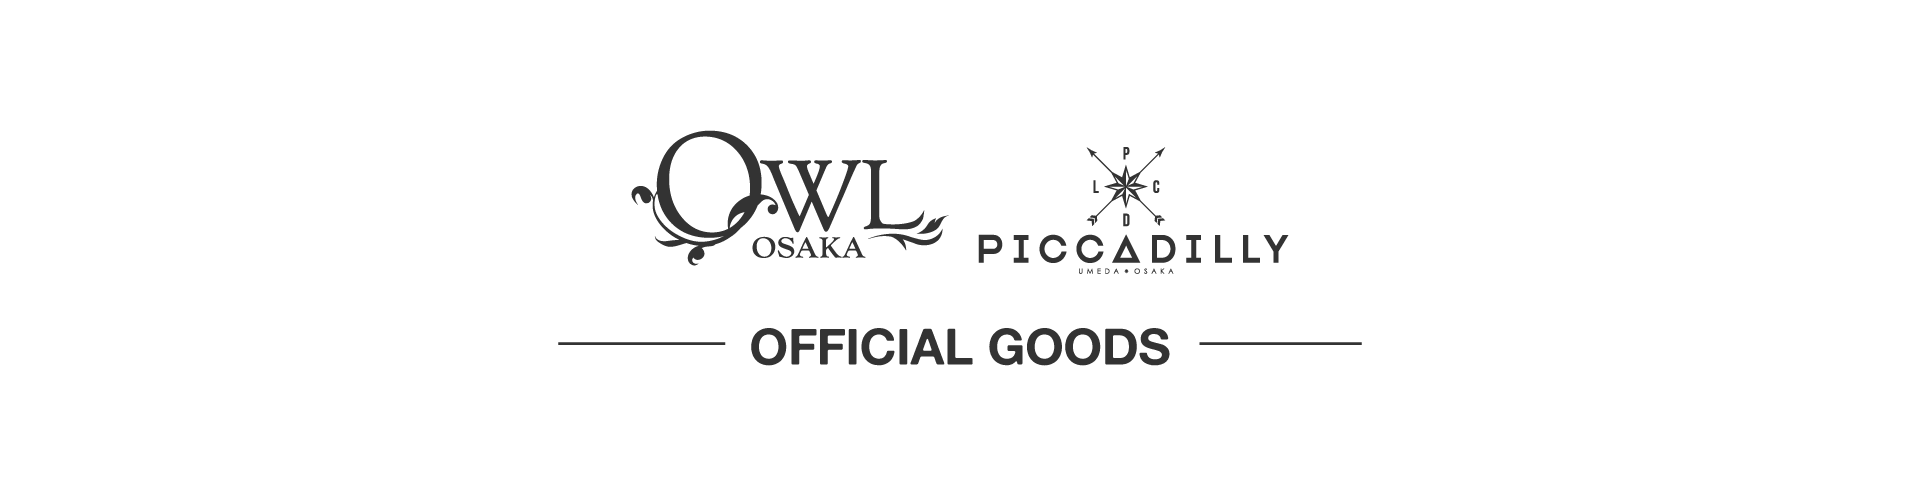 OWL OSAKA×CLUB PICCADILLY OFFICIAL GOODS